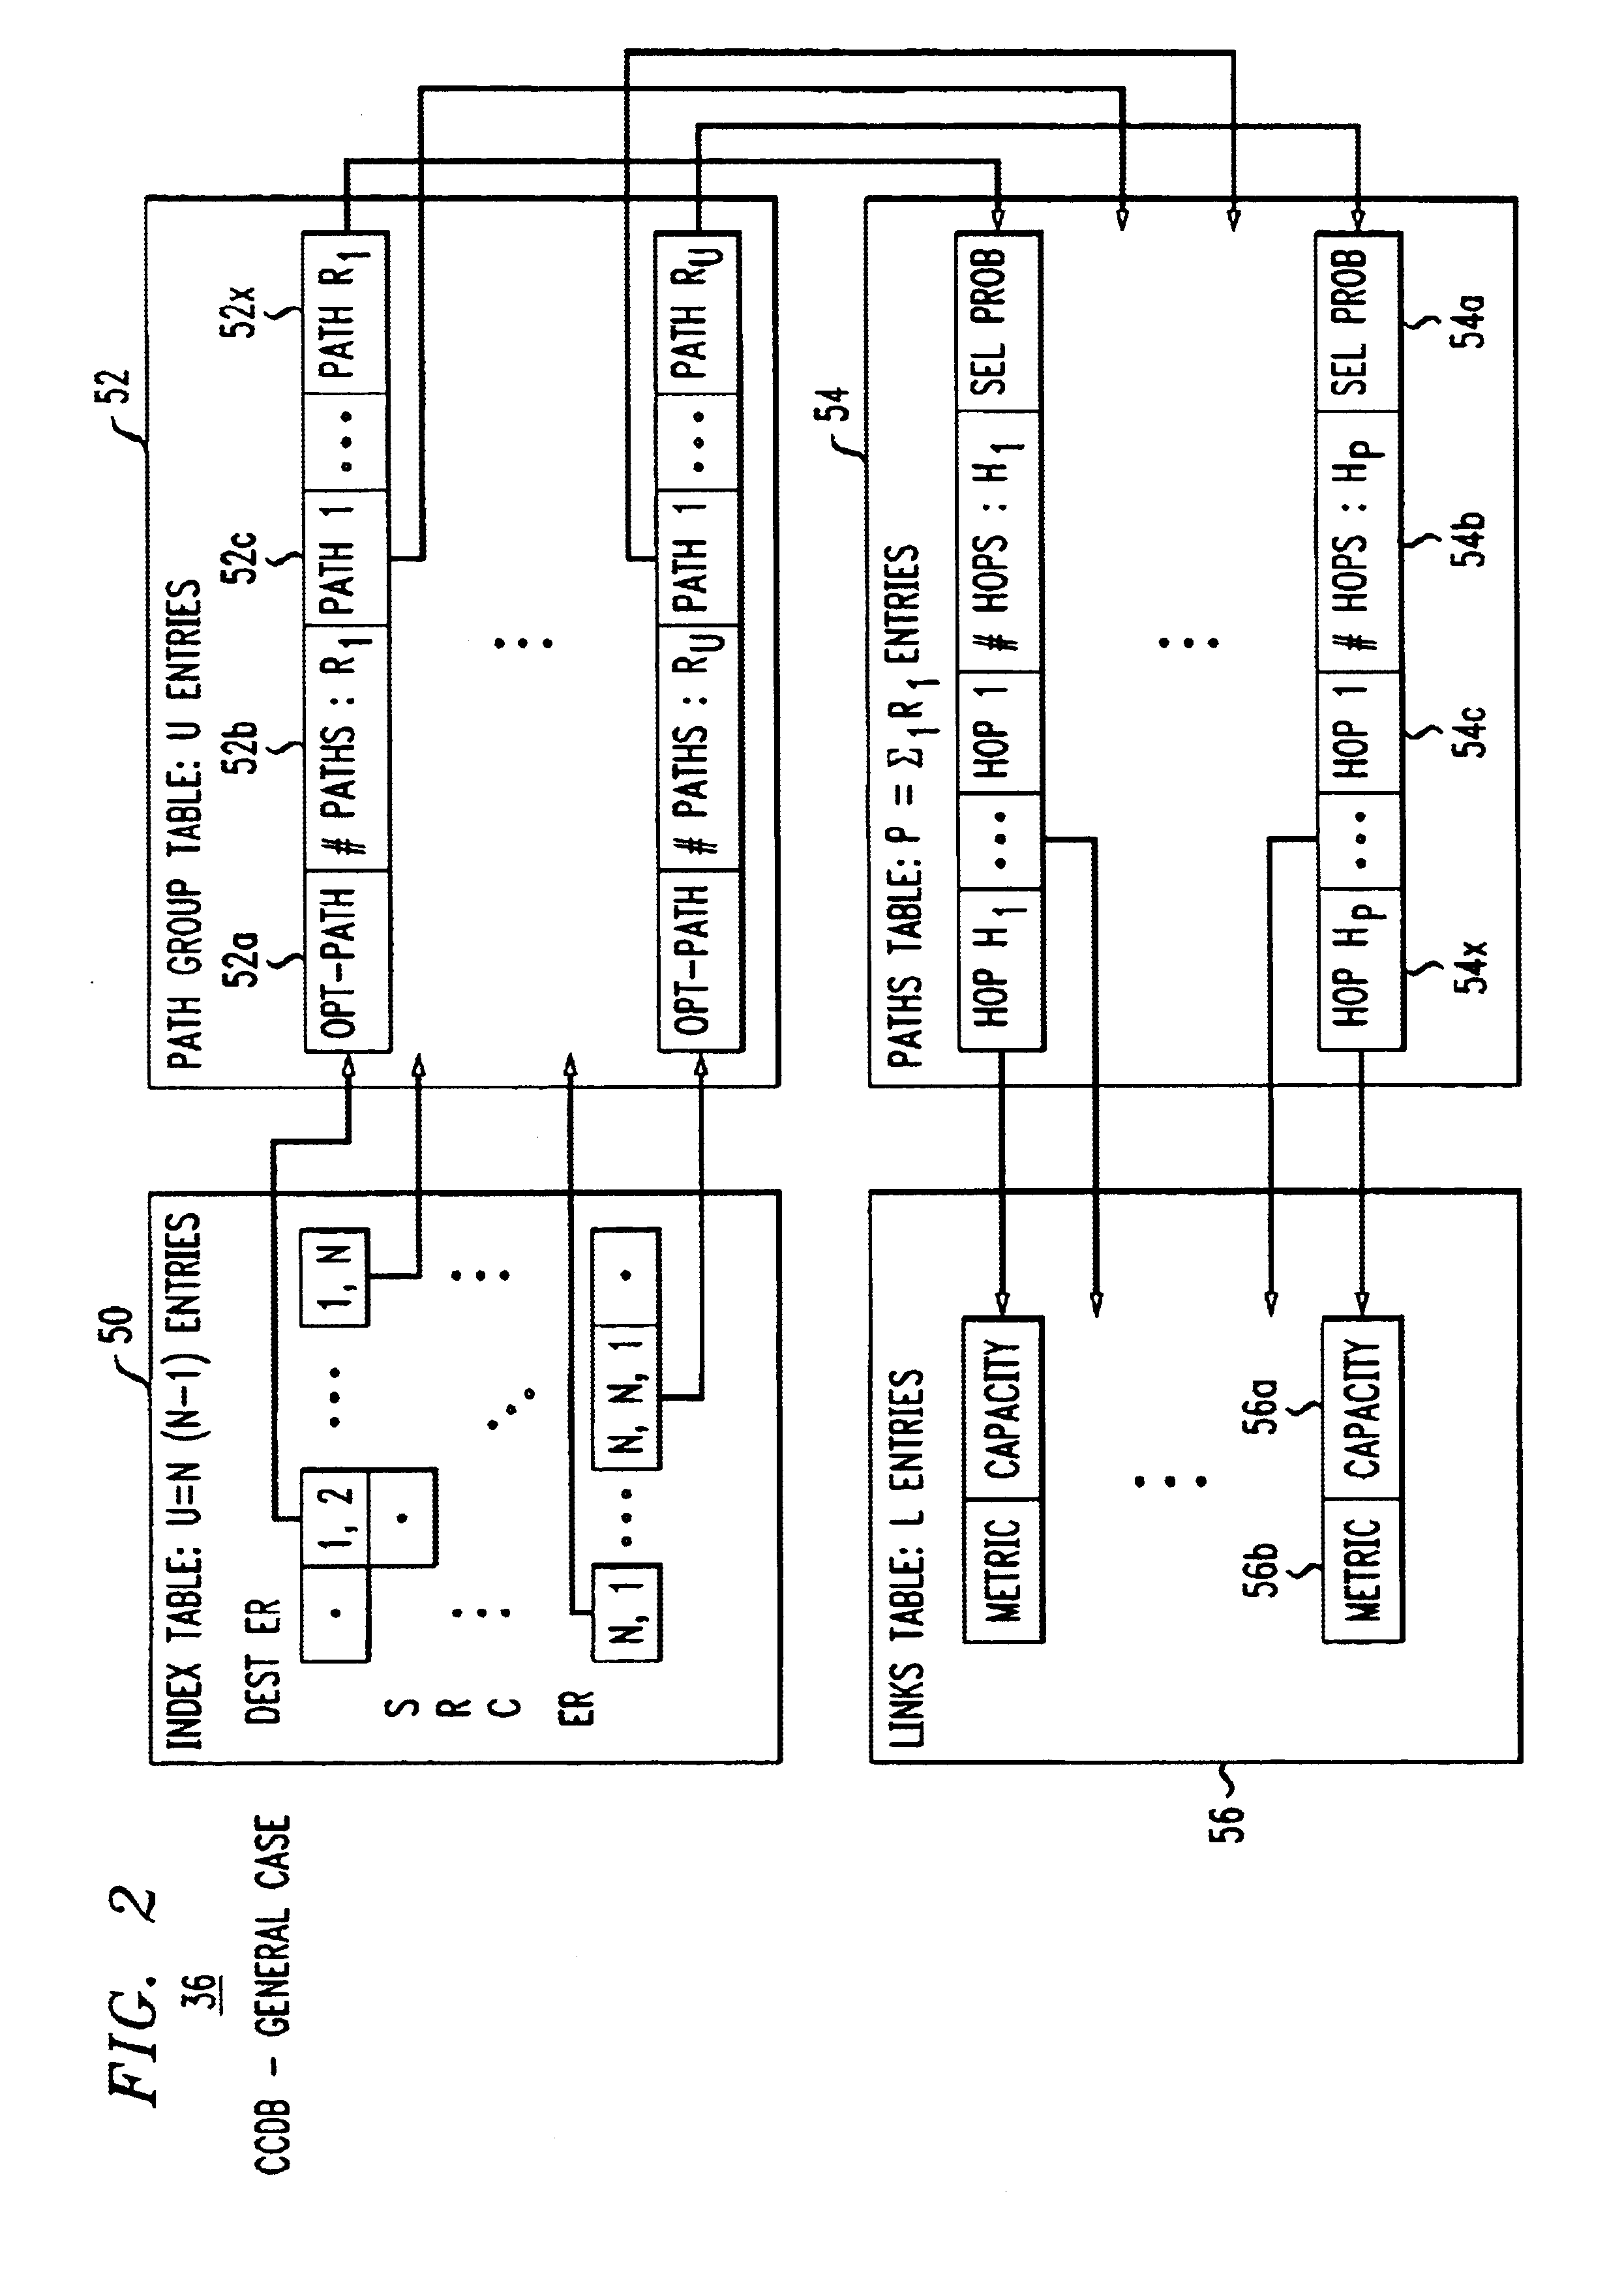 Method and apparatus to provide centralized call admission control and load balancing for a voice-over-IP network